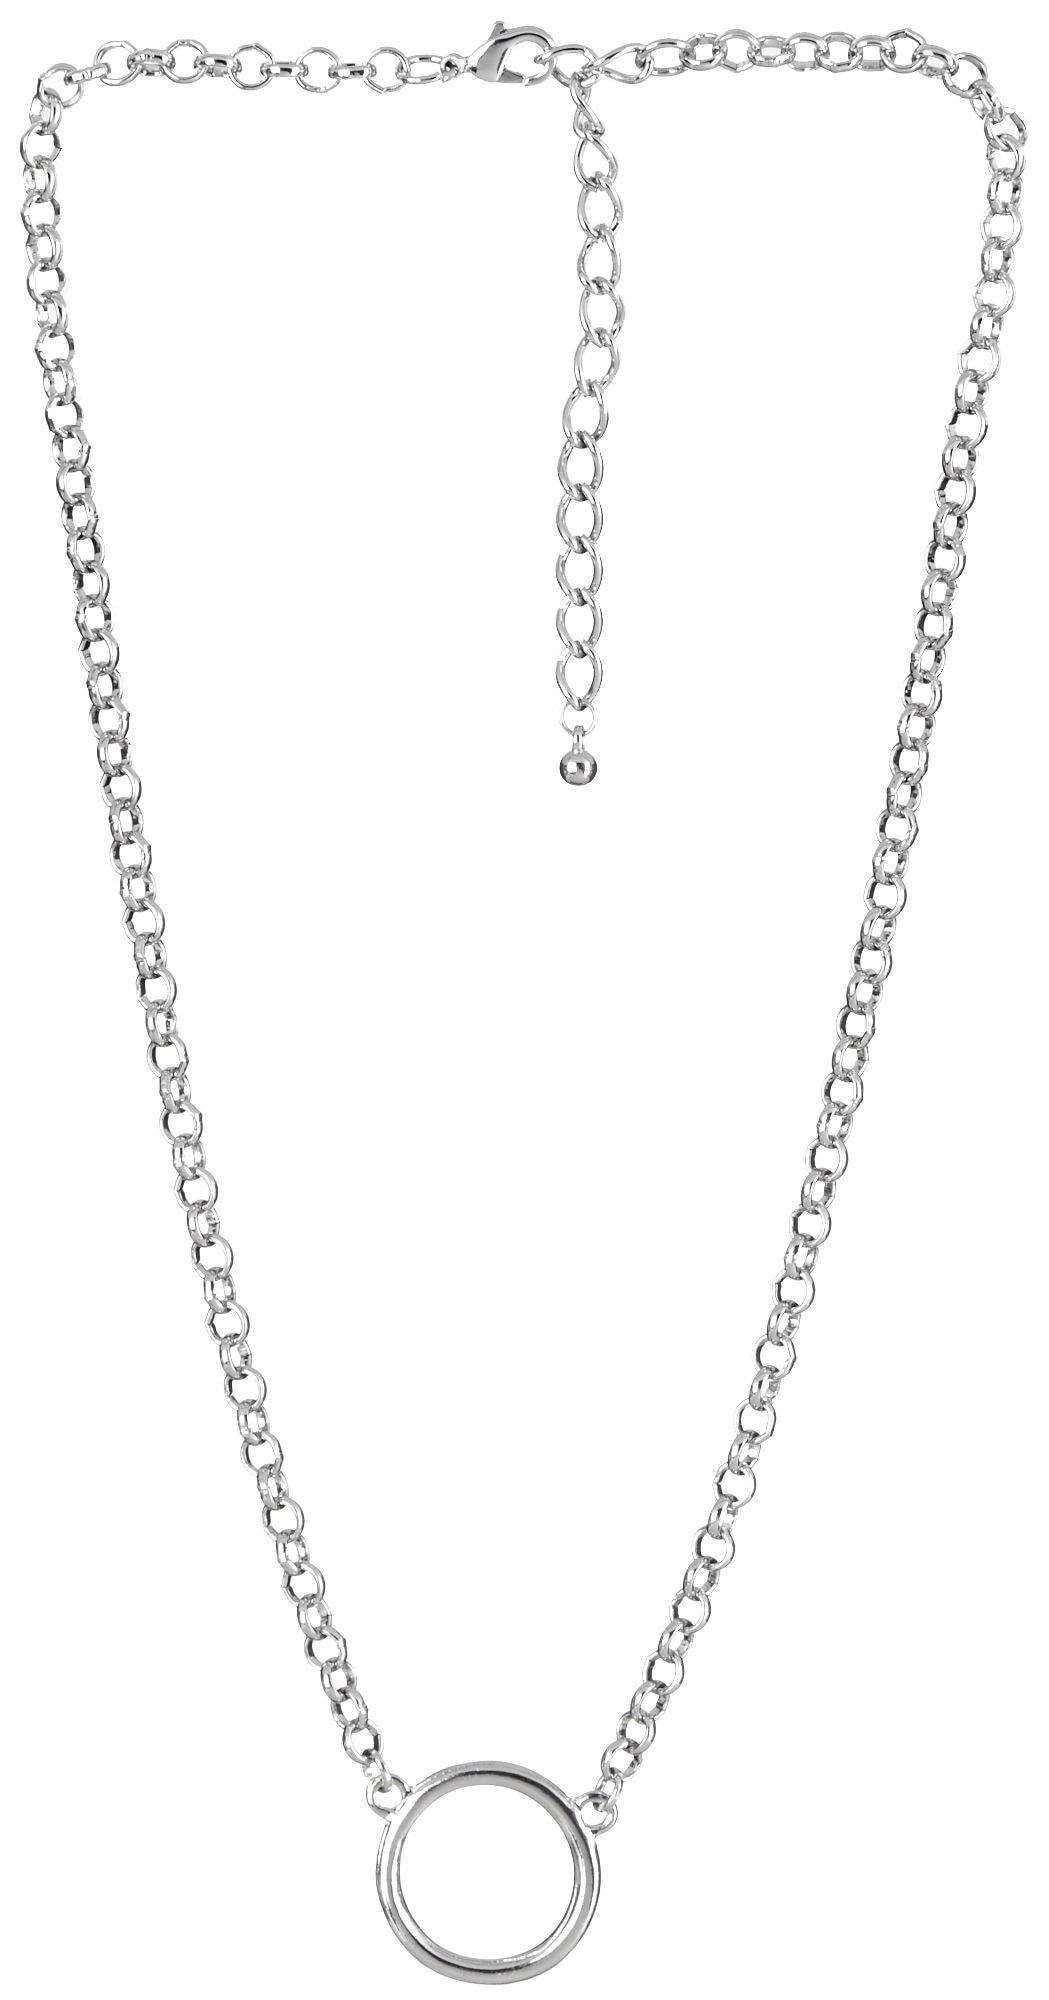 Wearable Art By Roman Silver Tone Chain Necklace